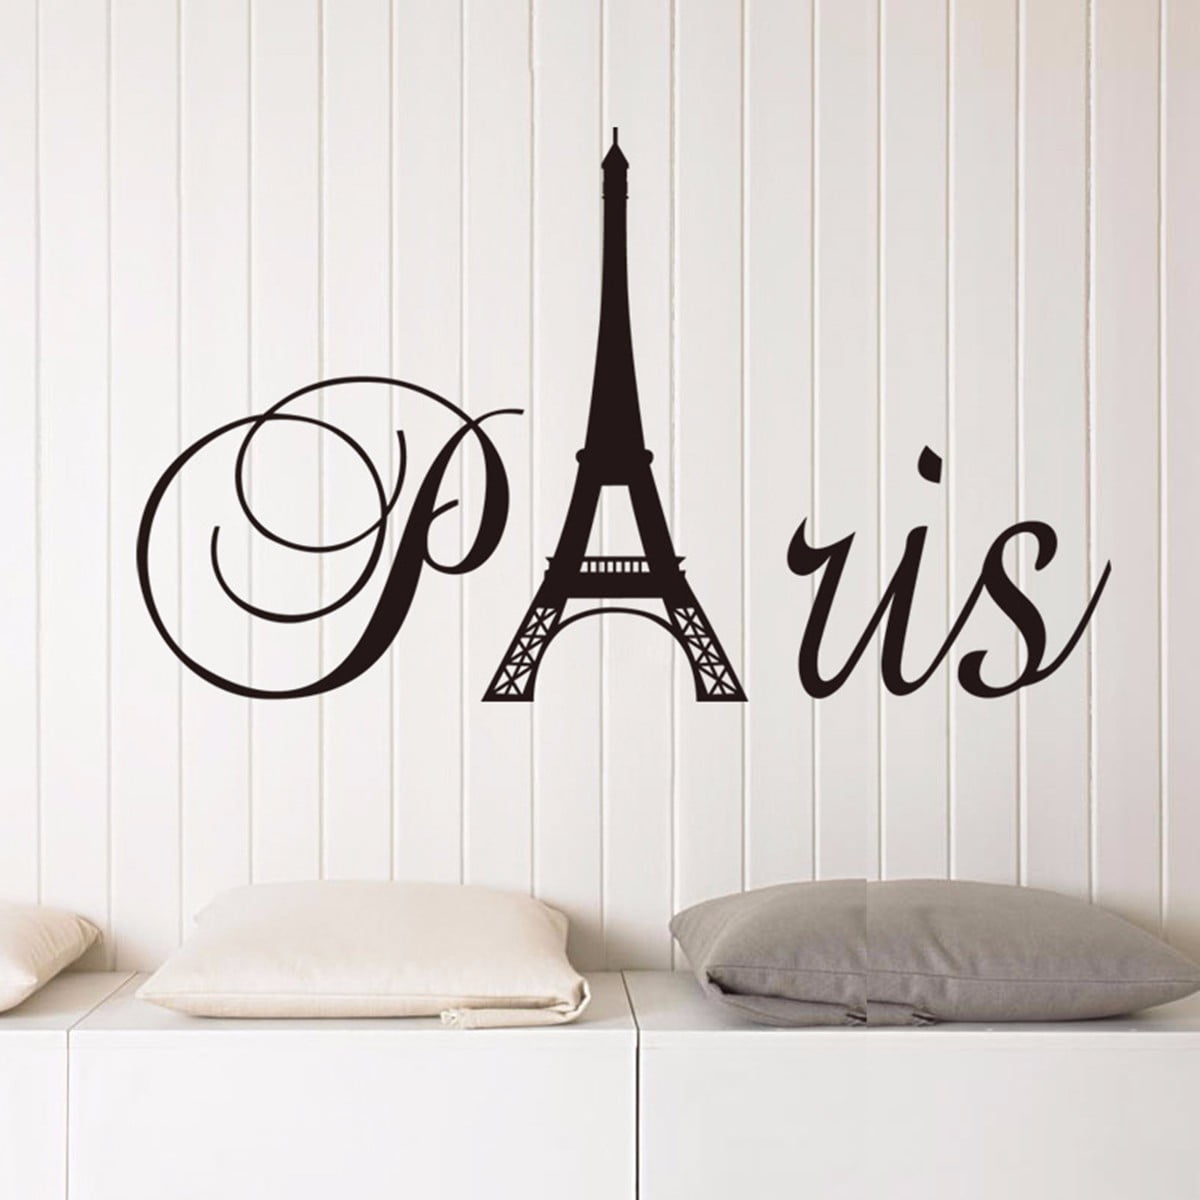 Details about   Removable Paris Eiffel Tower Art Decal Wall Sticker Mural DIY Room Home Vinyl US